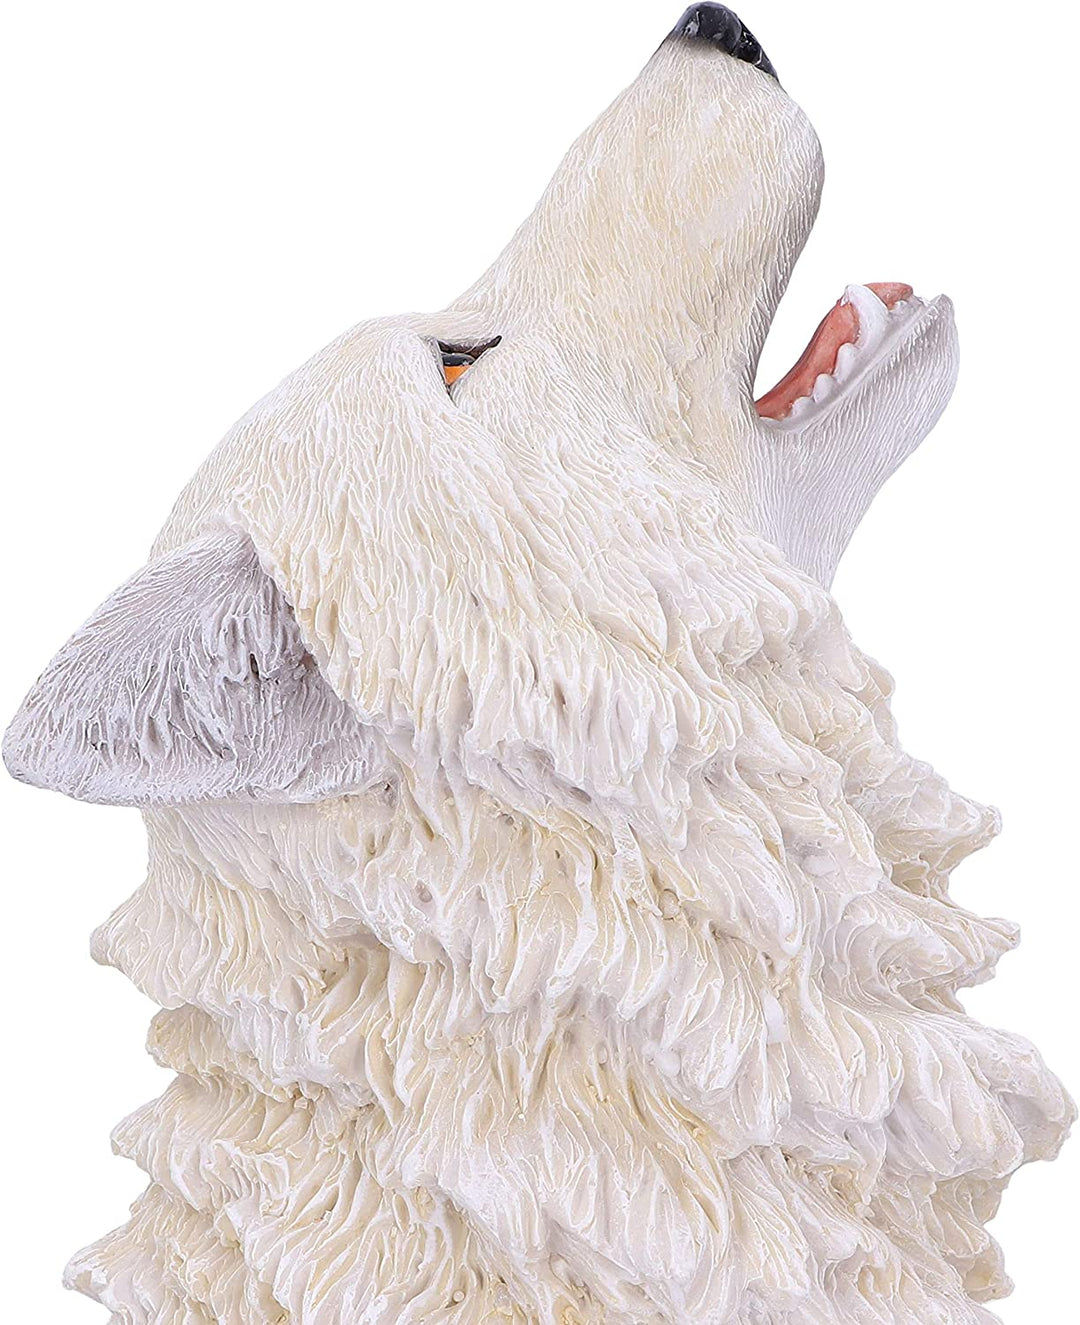 Nemesis Now Storms Cry Howling White Wolf Figure 41.5cm